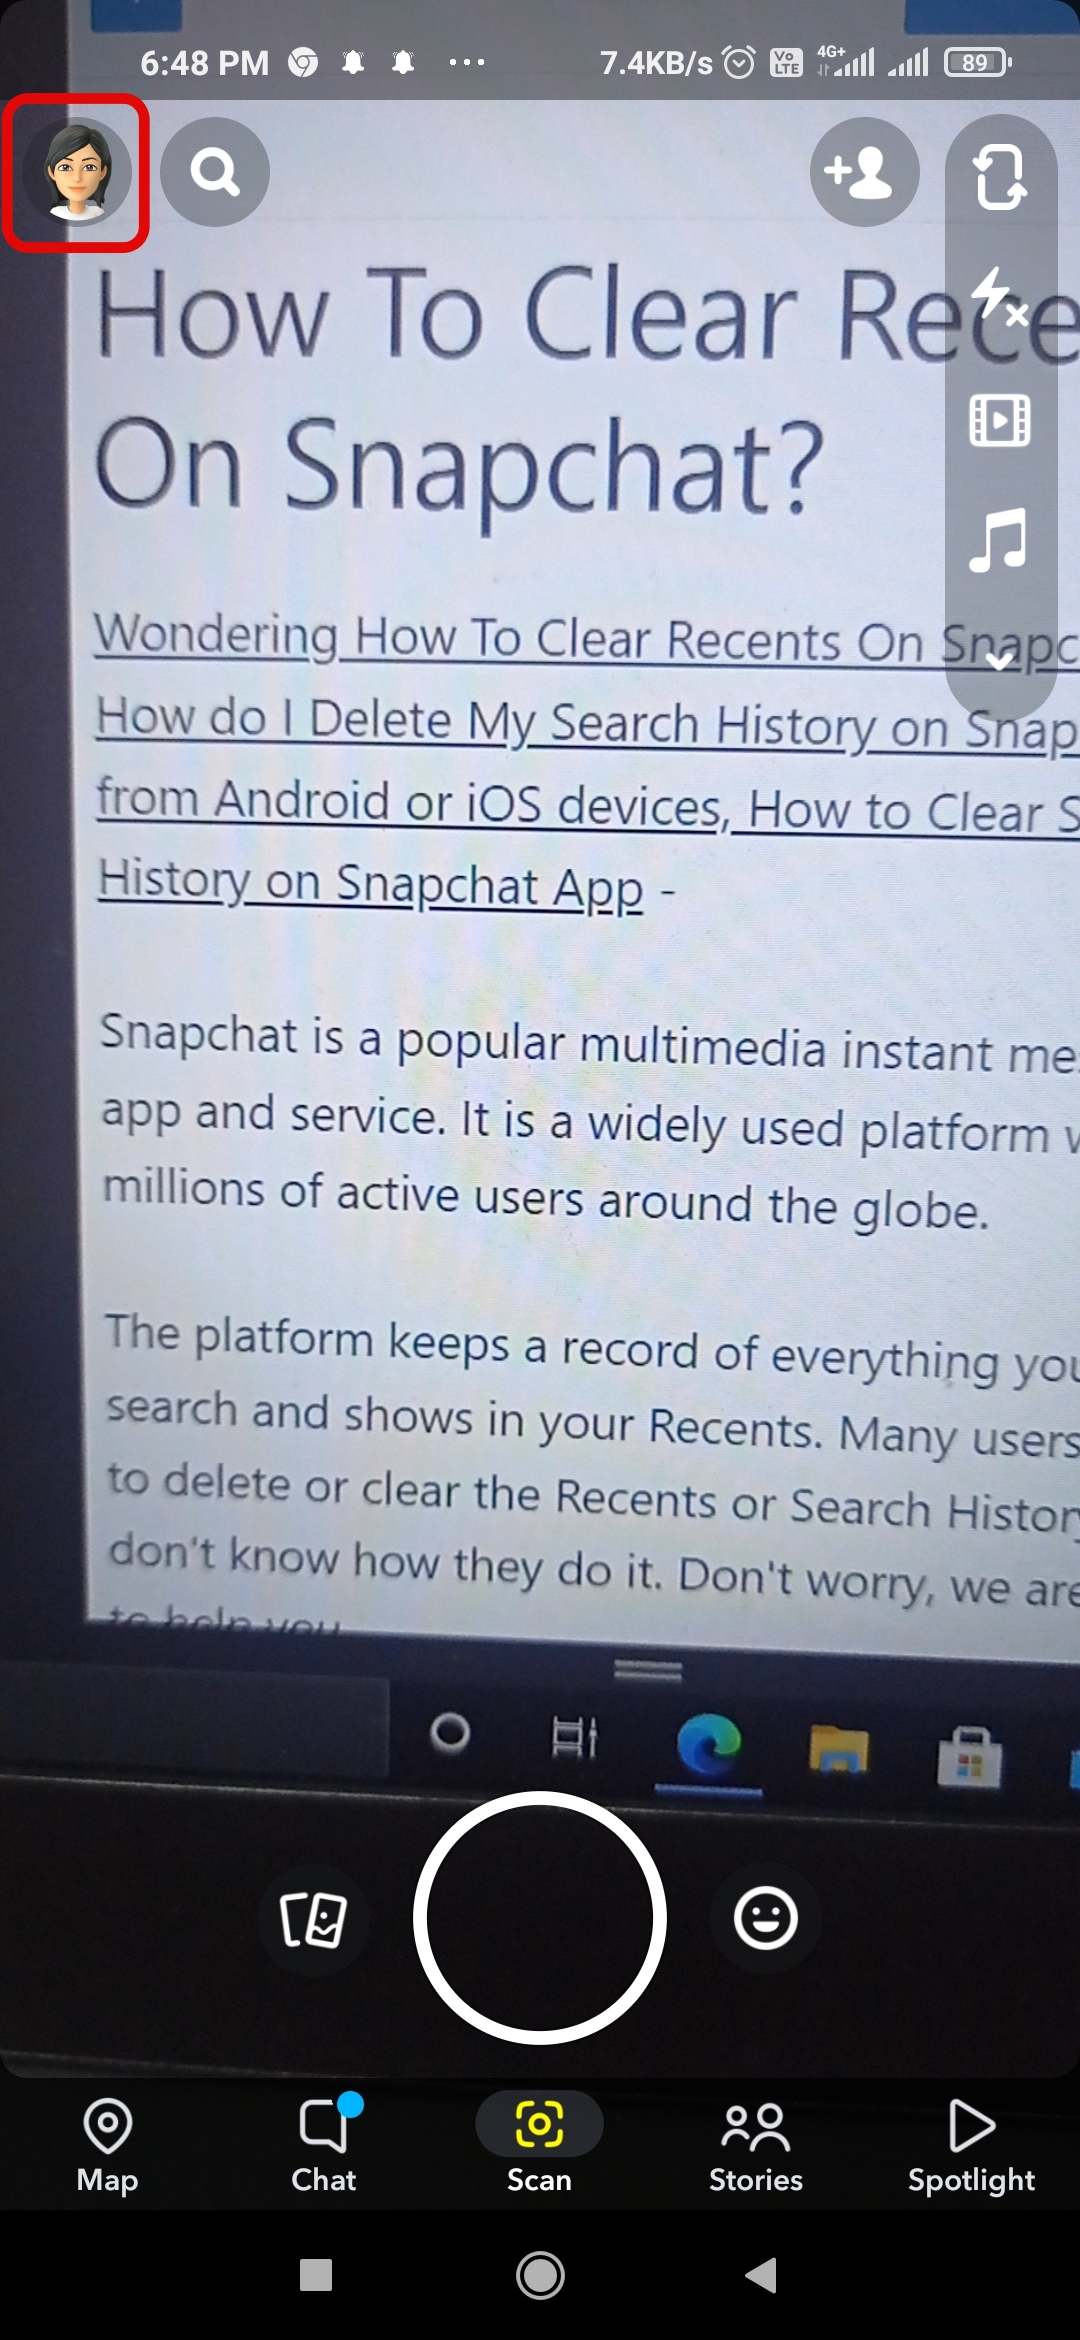 How To Clear Recents On Snapchat?